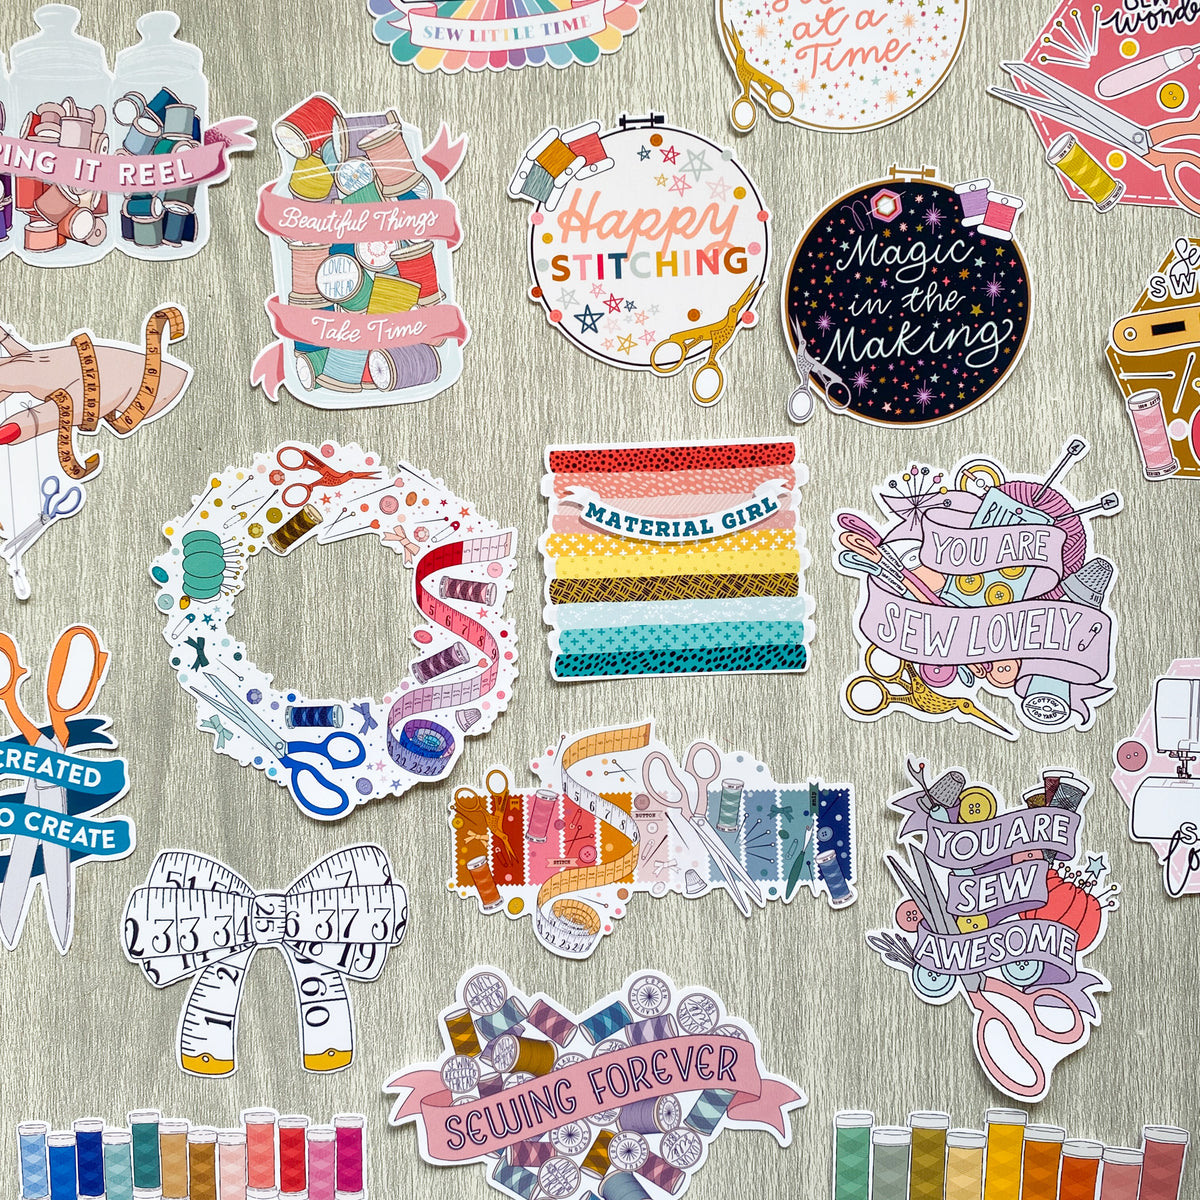 Sewing Stickers for Sale  Cute stickers, Scrapbook stickers